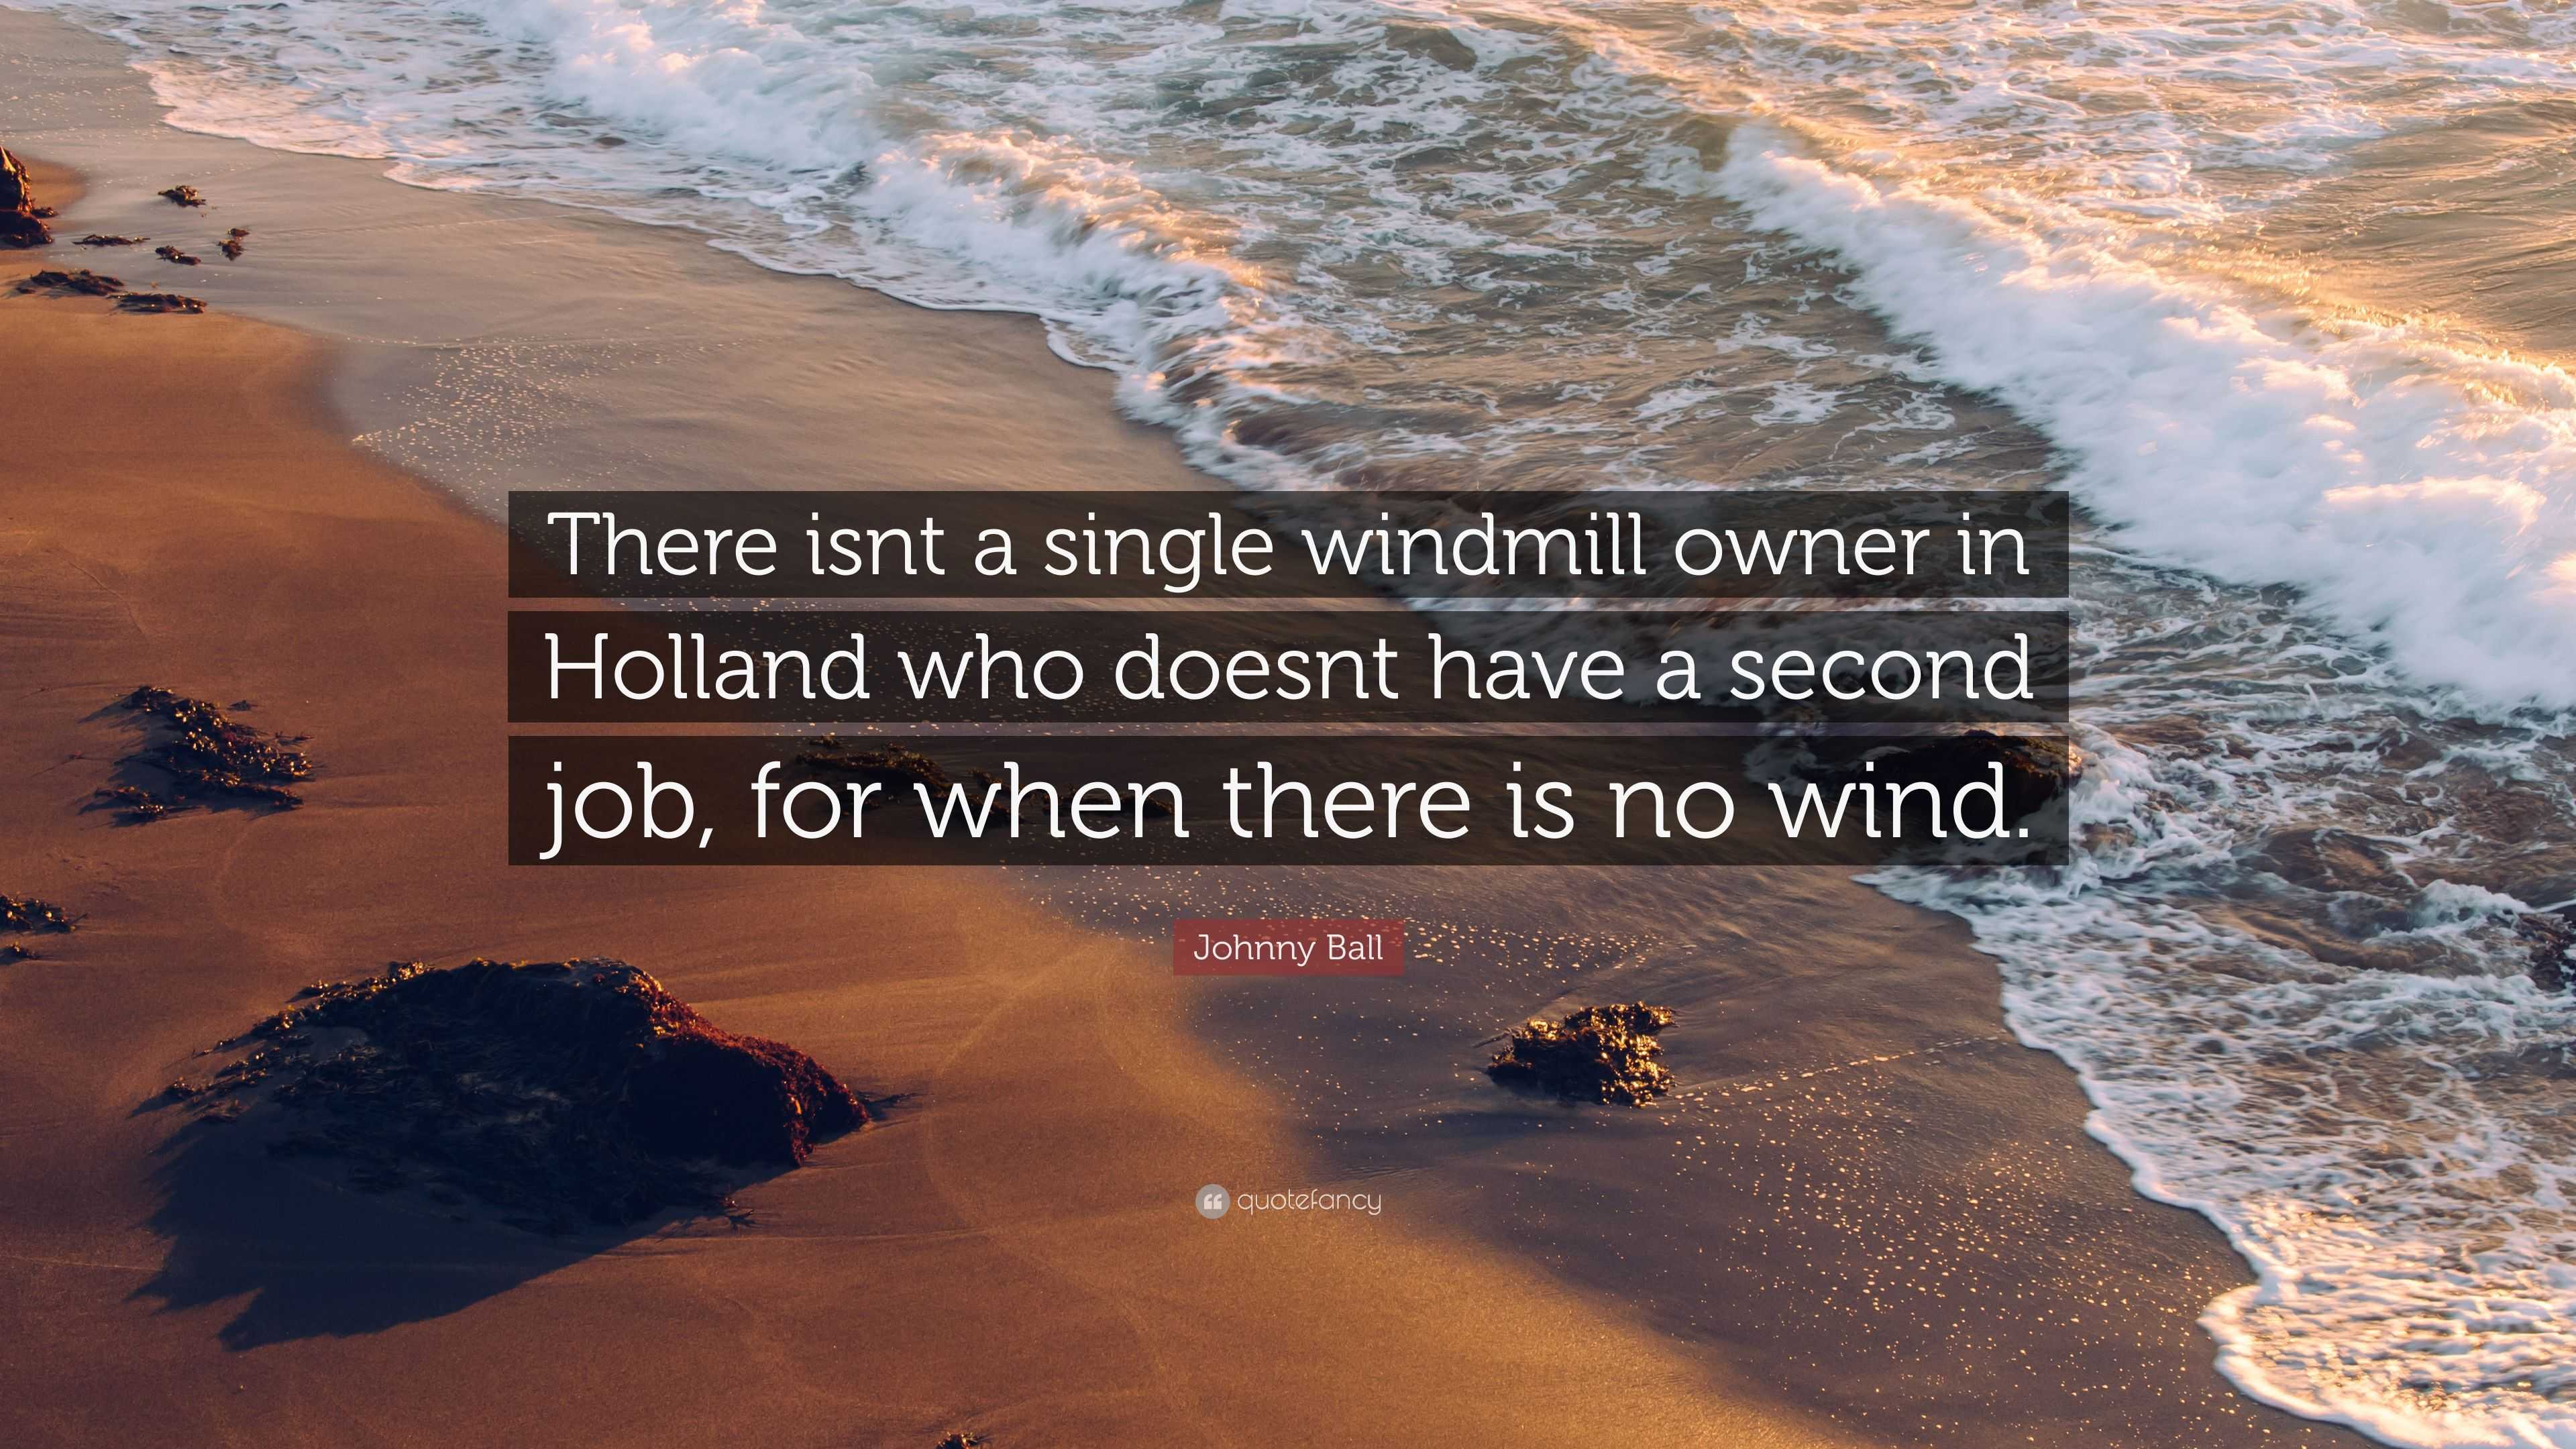 Windmill Quote : Windmill Quote Wall Art Redbubble : Enjoy our